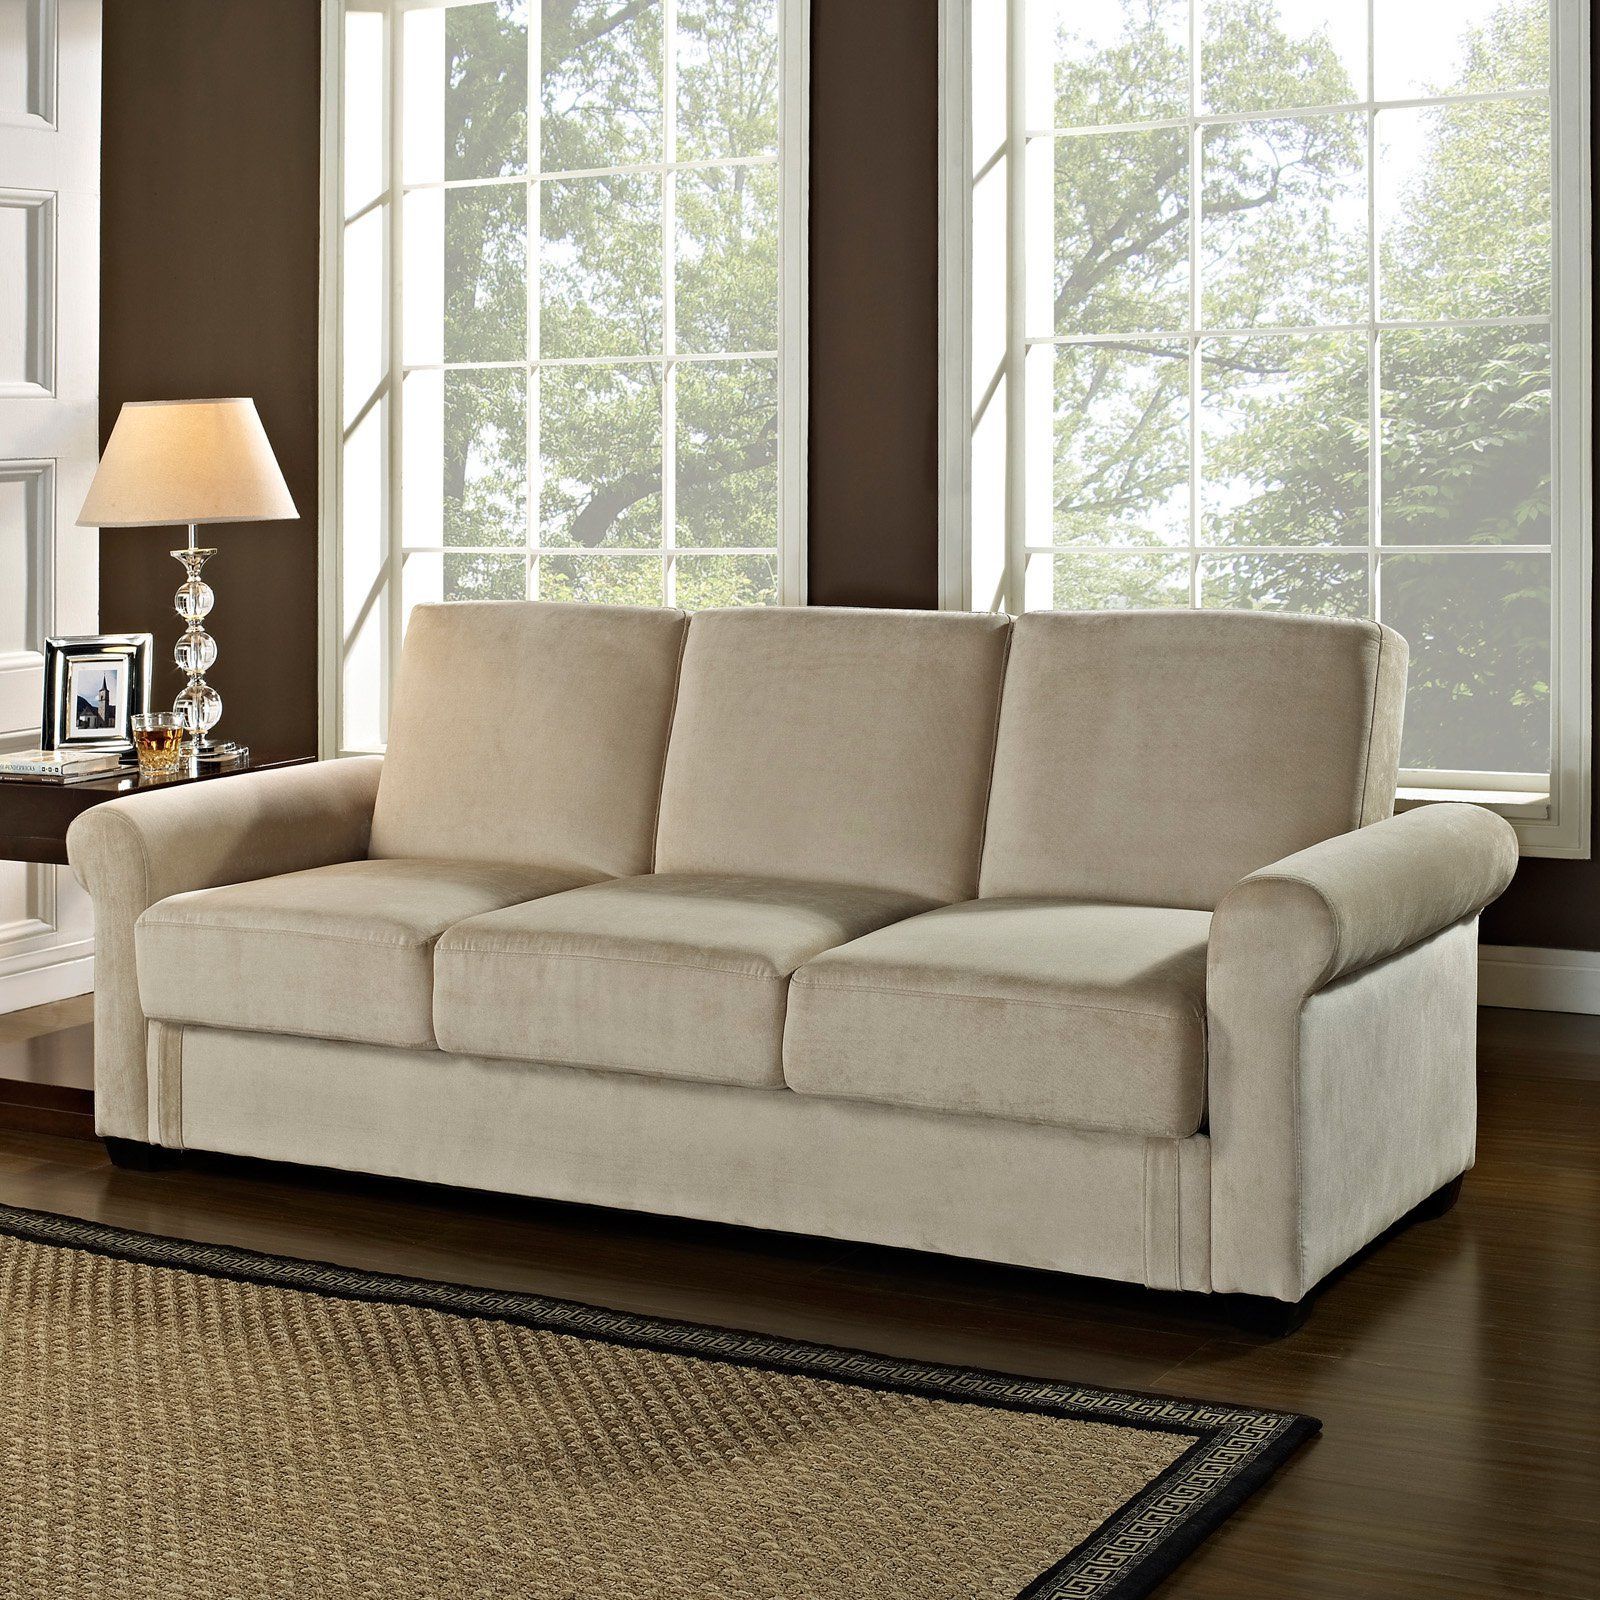 Have To Have It. Serta Dream Convertible Thomas Sofa – Light Brown Regarding 8 Seat Convertible Sofas (Gallery 2 of 20)